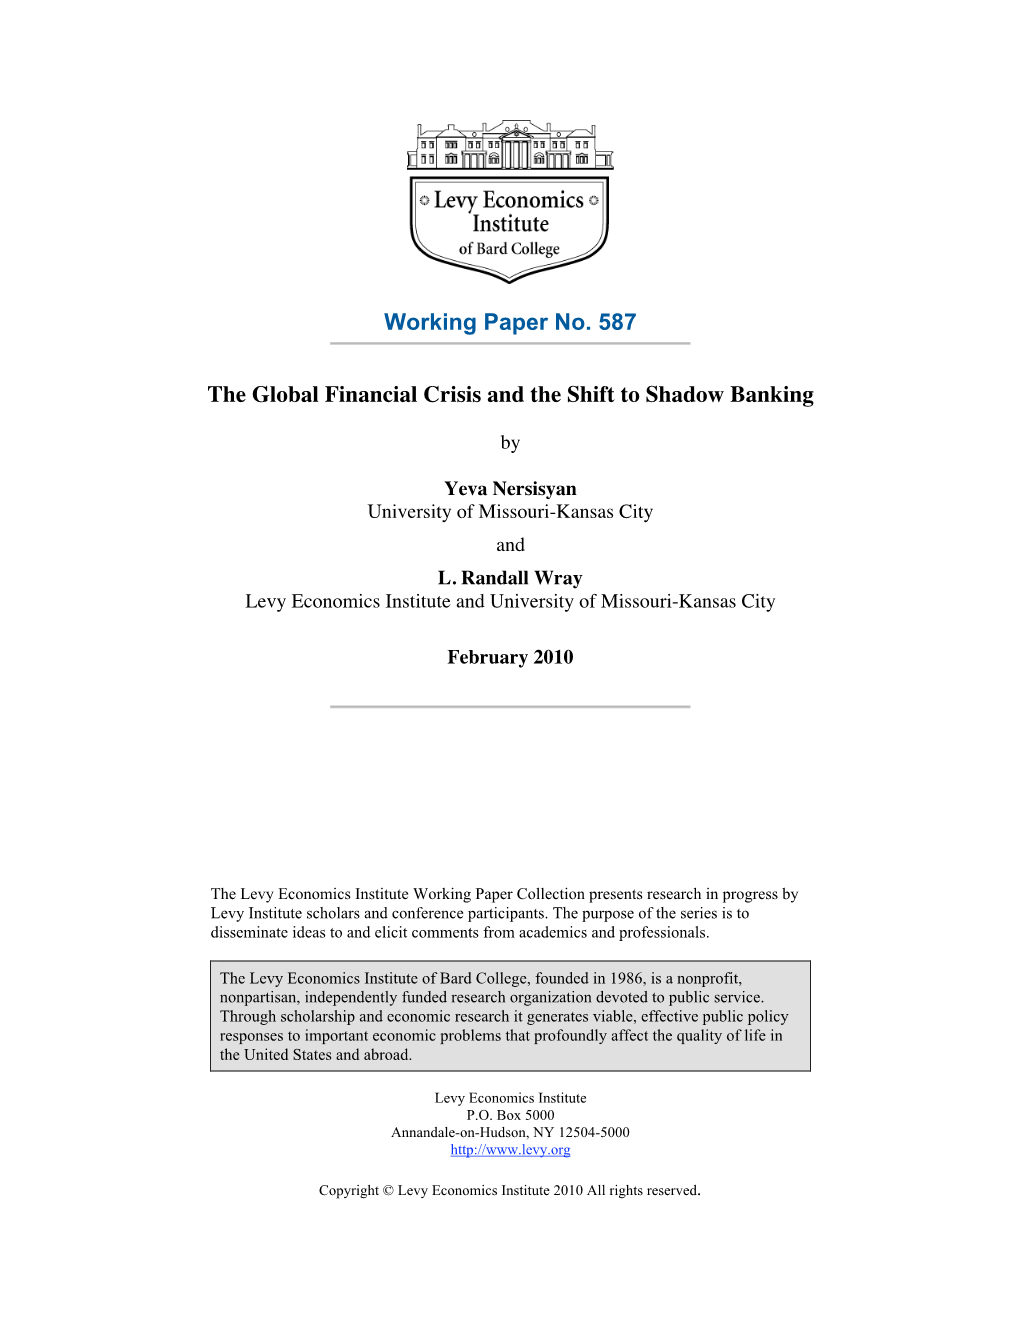 Working Paper No. 587 the Global Financial Crisis and the Shift To